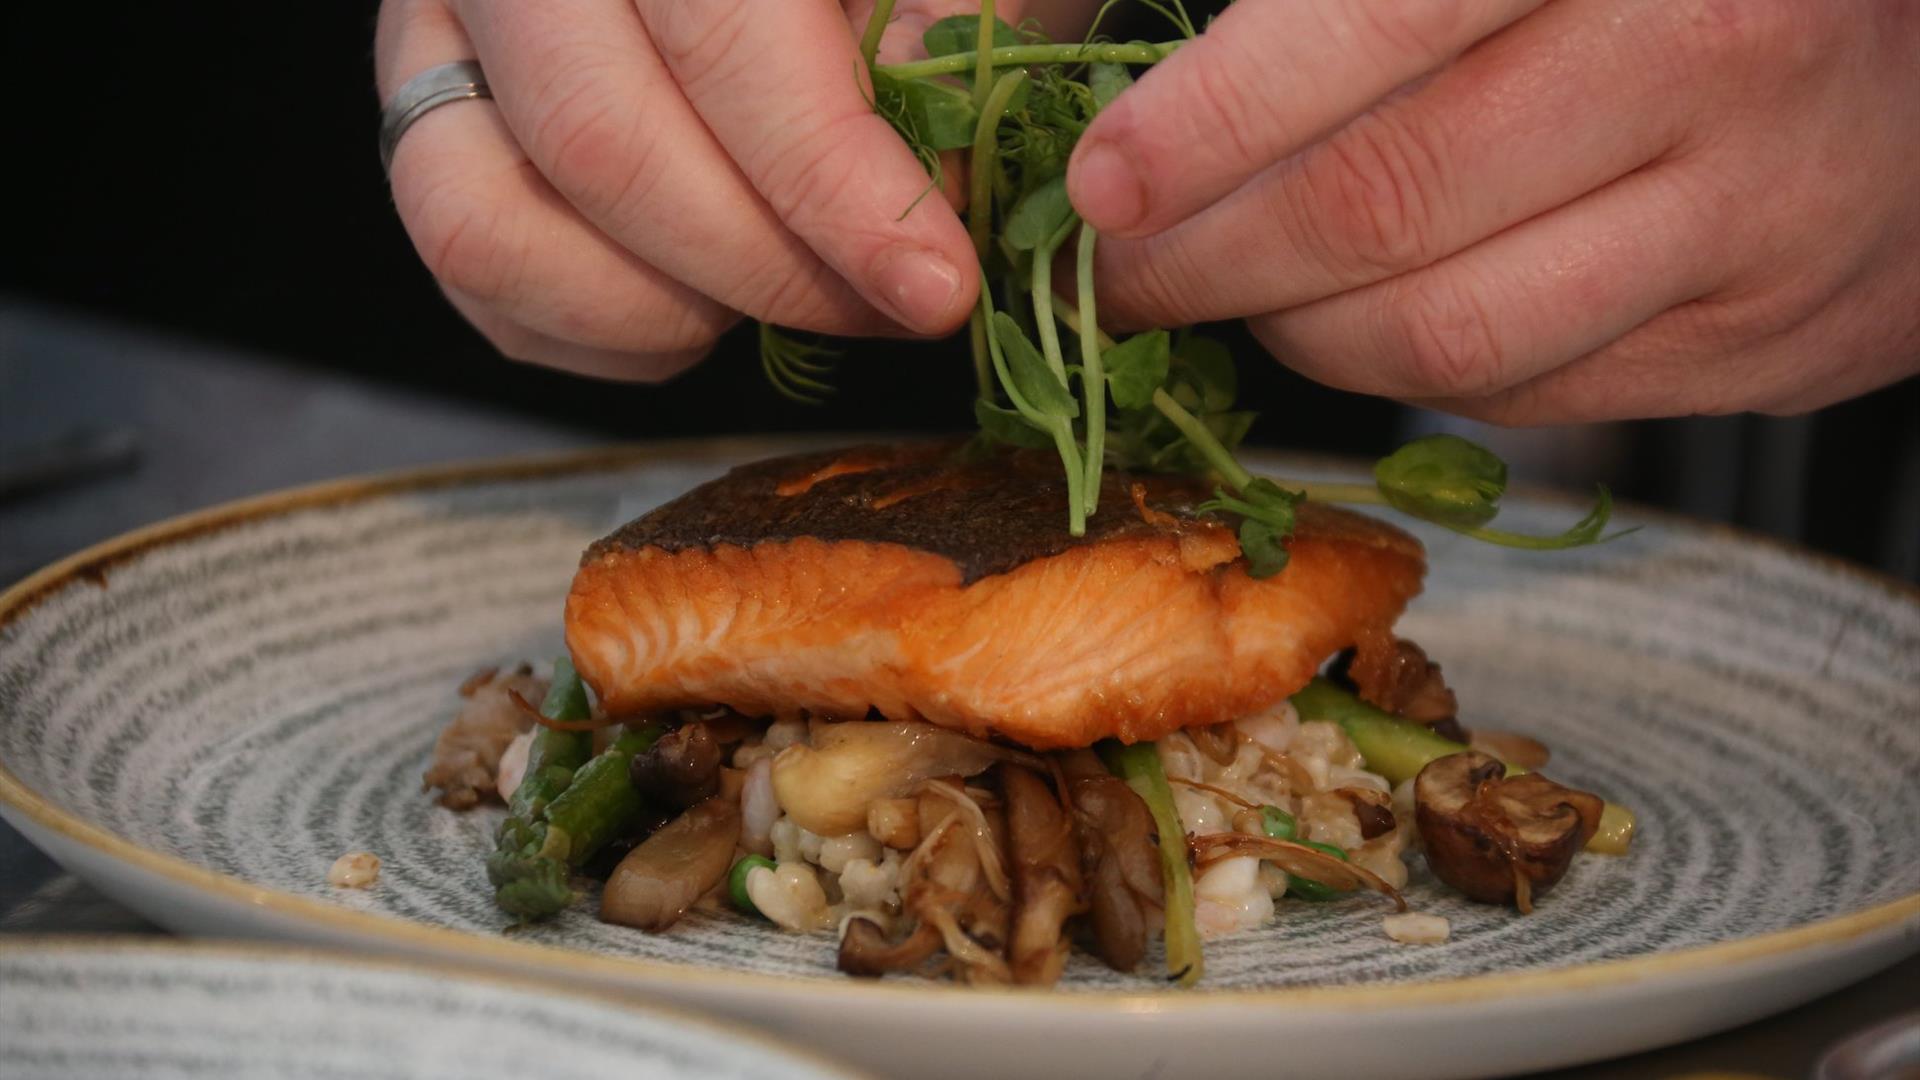 a close up of a salmon dish being prepared